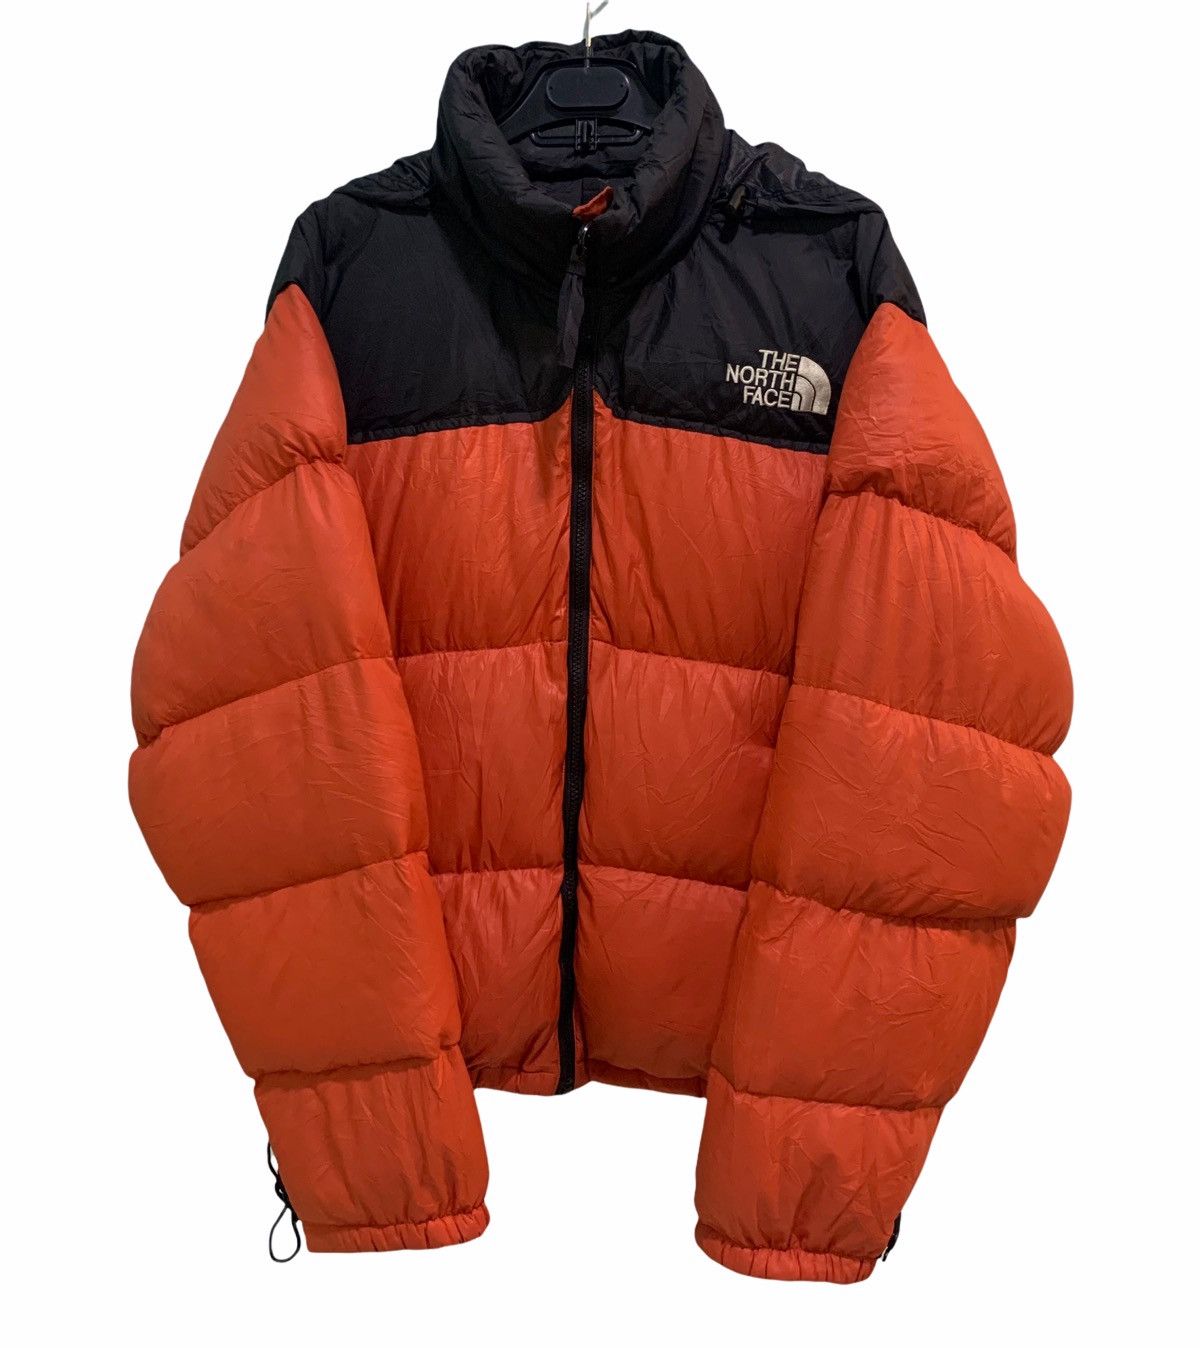 The North Face Vintage The North Face puffer jacket